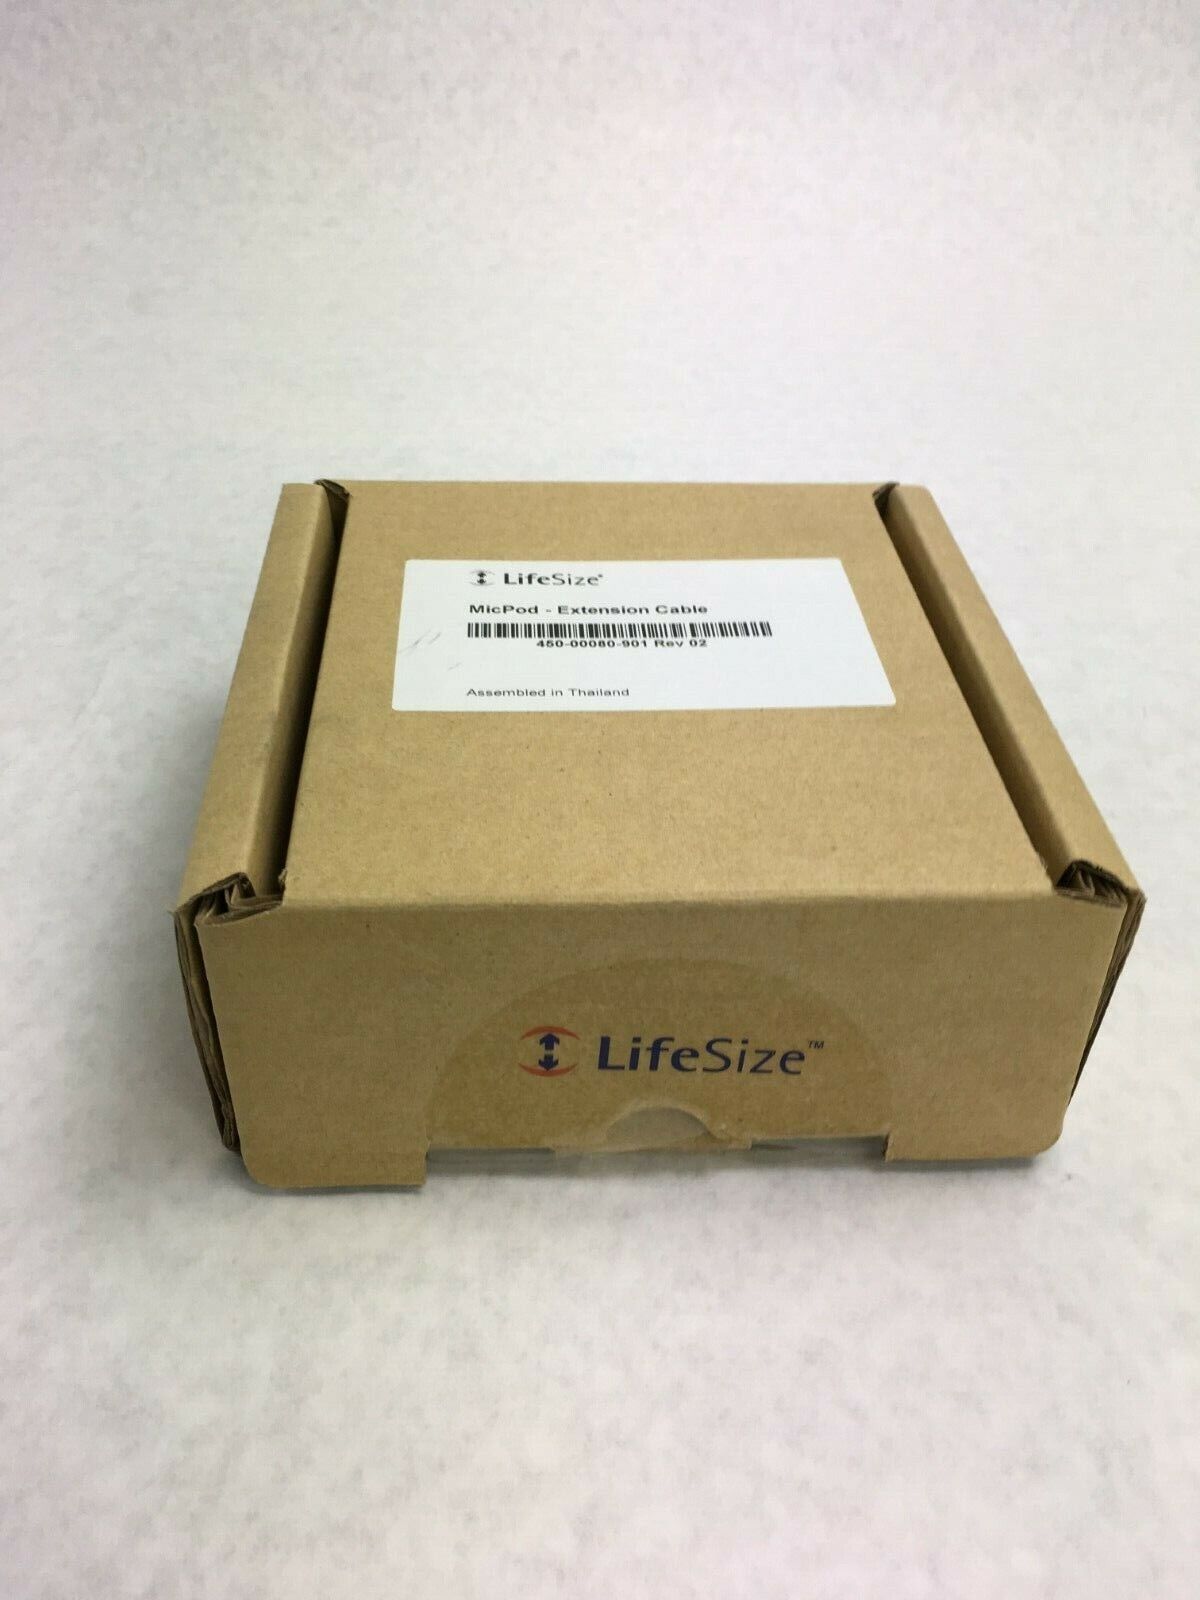 NEW LIFESIZE MICPOD EXTENSION CABLE 450-00080-901